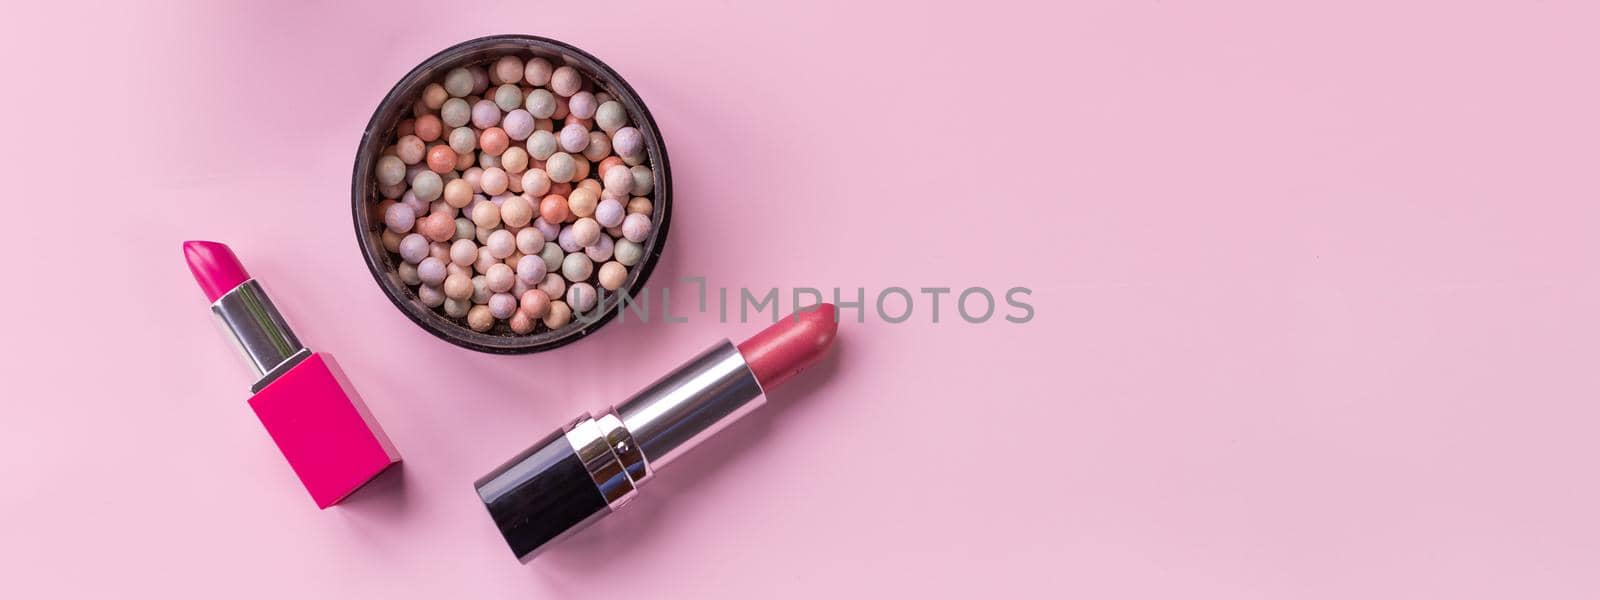 Decorative cosmetics and accessories for make up on pink background.Composition of cosmetics with pink lipsticks and ball blush.Various cosmetic products for make-up. Copy space by YuliaYaspe1979